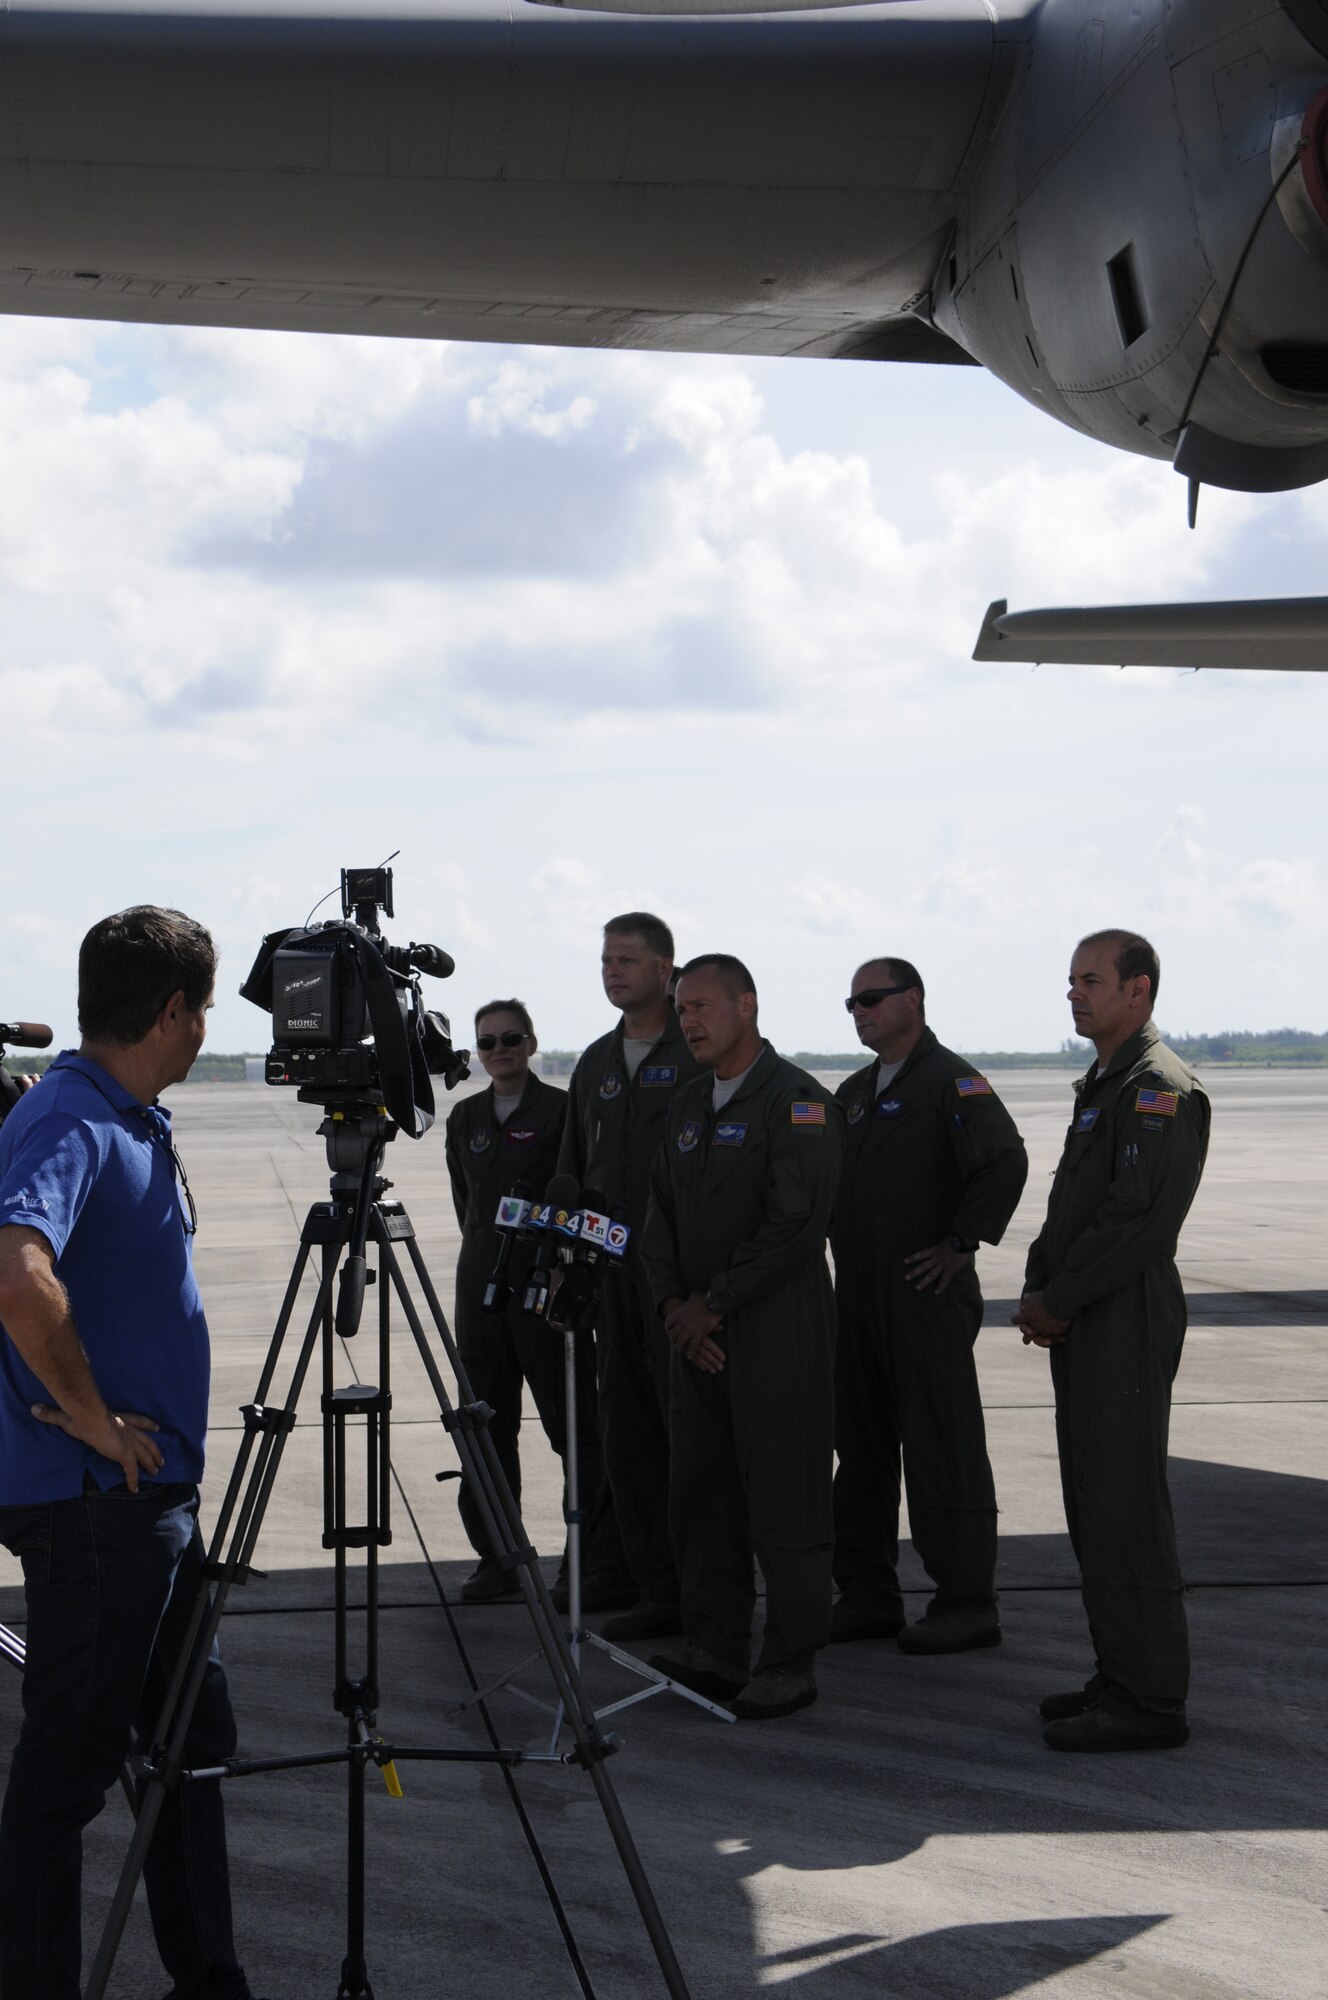 Skilled air crew from the 910th Airlift Wing in Youngstown, Ohio speak with local press about aerial spray mission at Homestead Air Reserve Base, Fla., July 31. The flight crew is environmentally conscious and works with local authorities to prevent harming critical habitat areas and national parks. (U.S. Air Force photo by/Senior Airman Aja Heiden)
